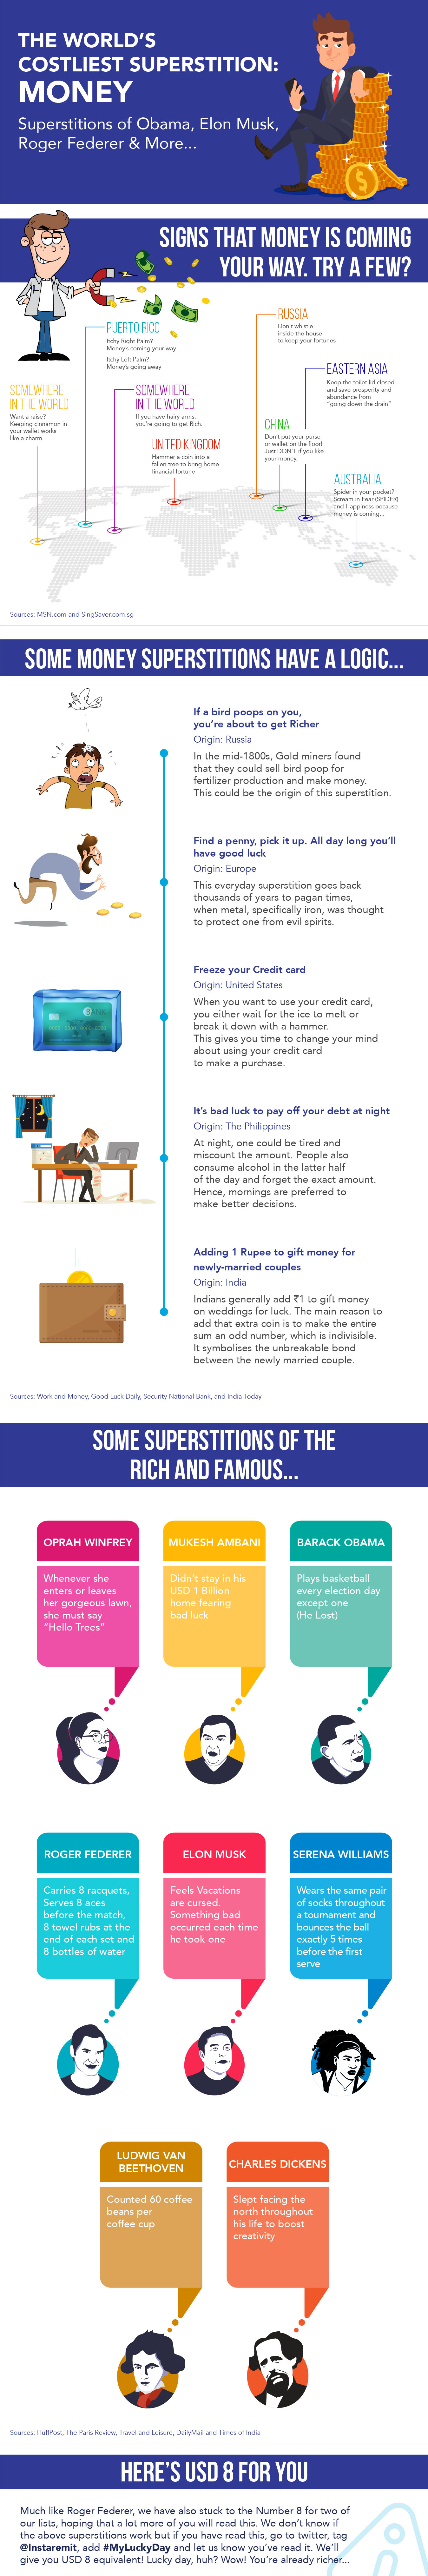 8 Signs That Indicate You May Be Getting Richer